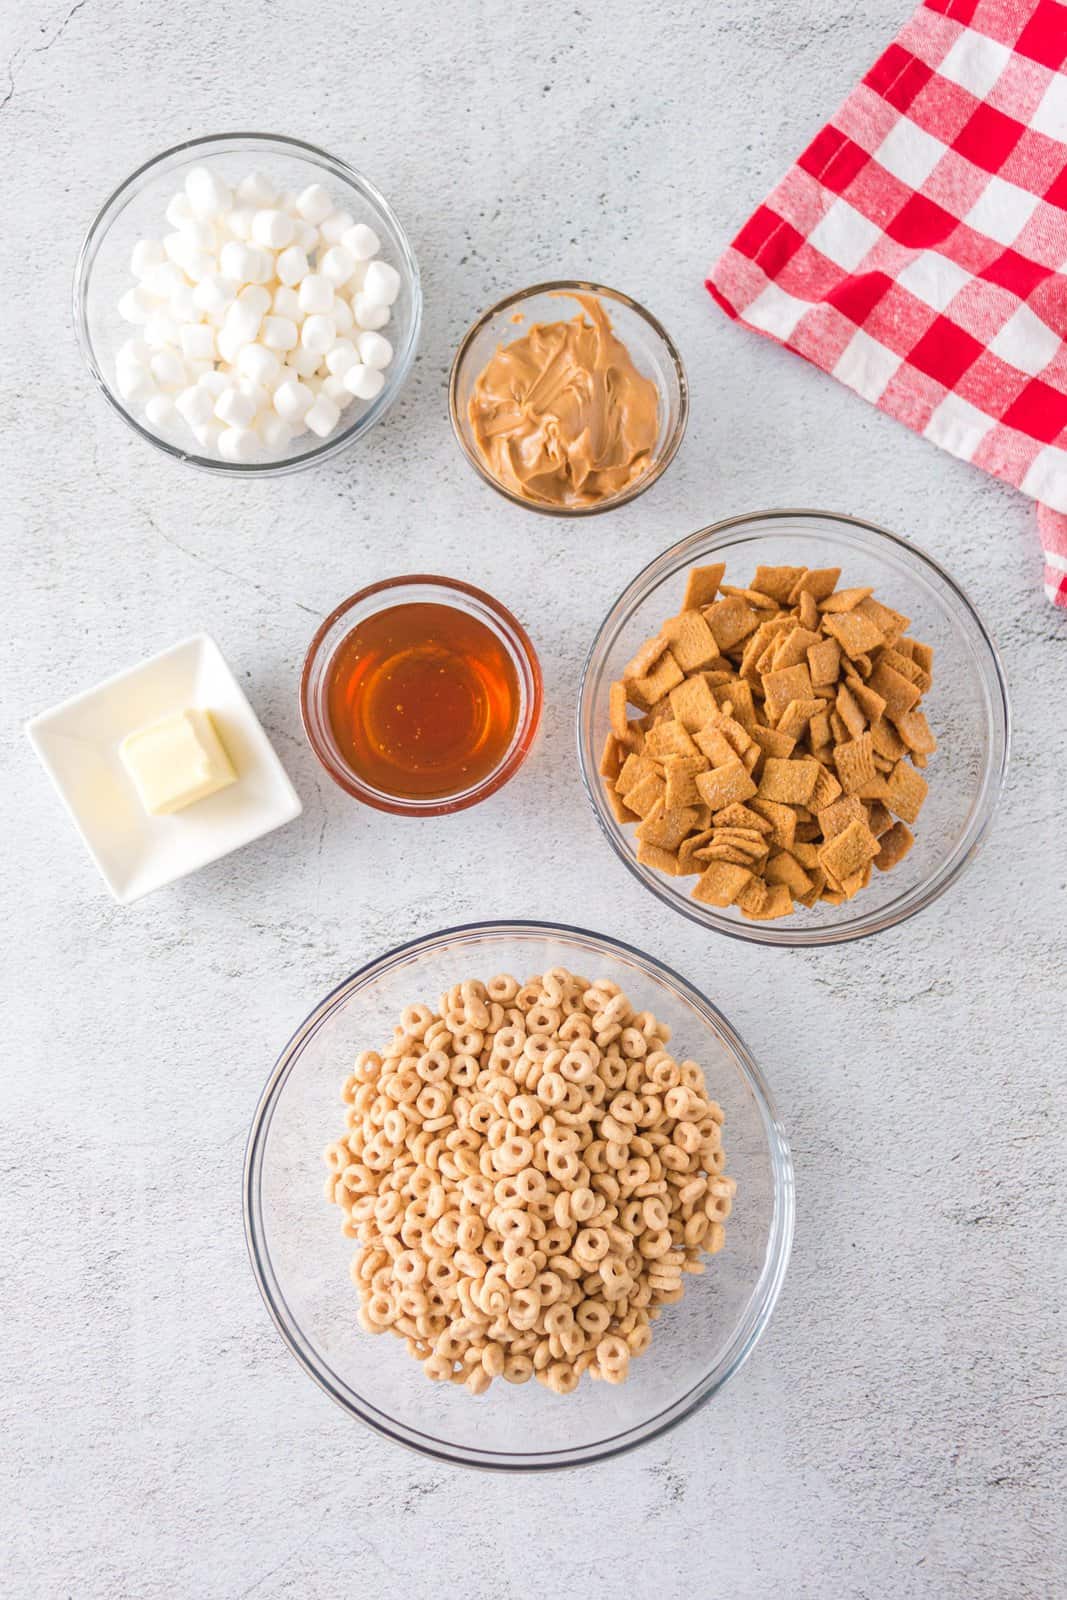 Ingredients needed: unsalted butter, mini marshmallows, honey, peanut butter, cheerios and golden grahams.